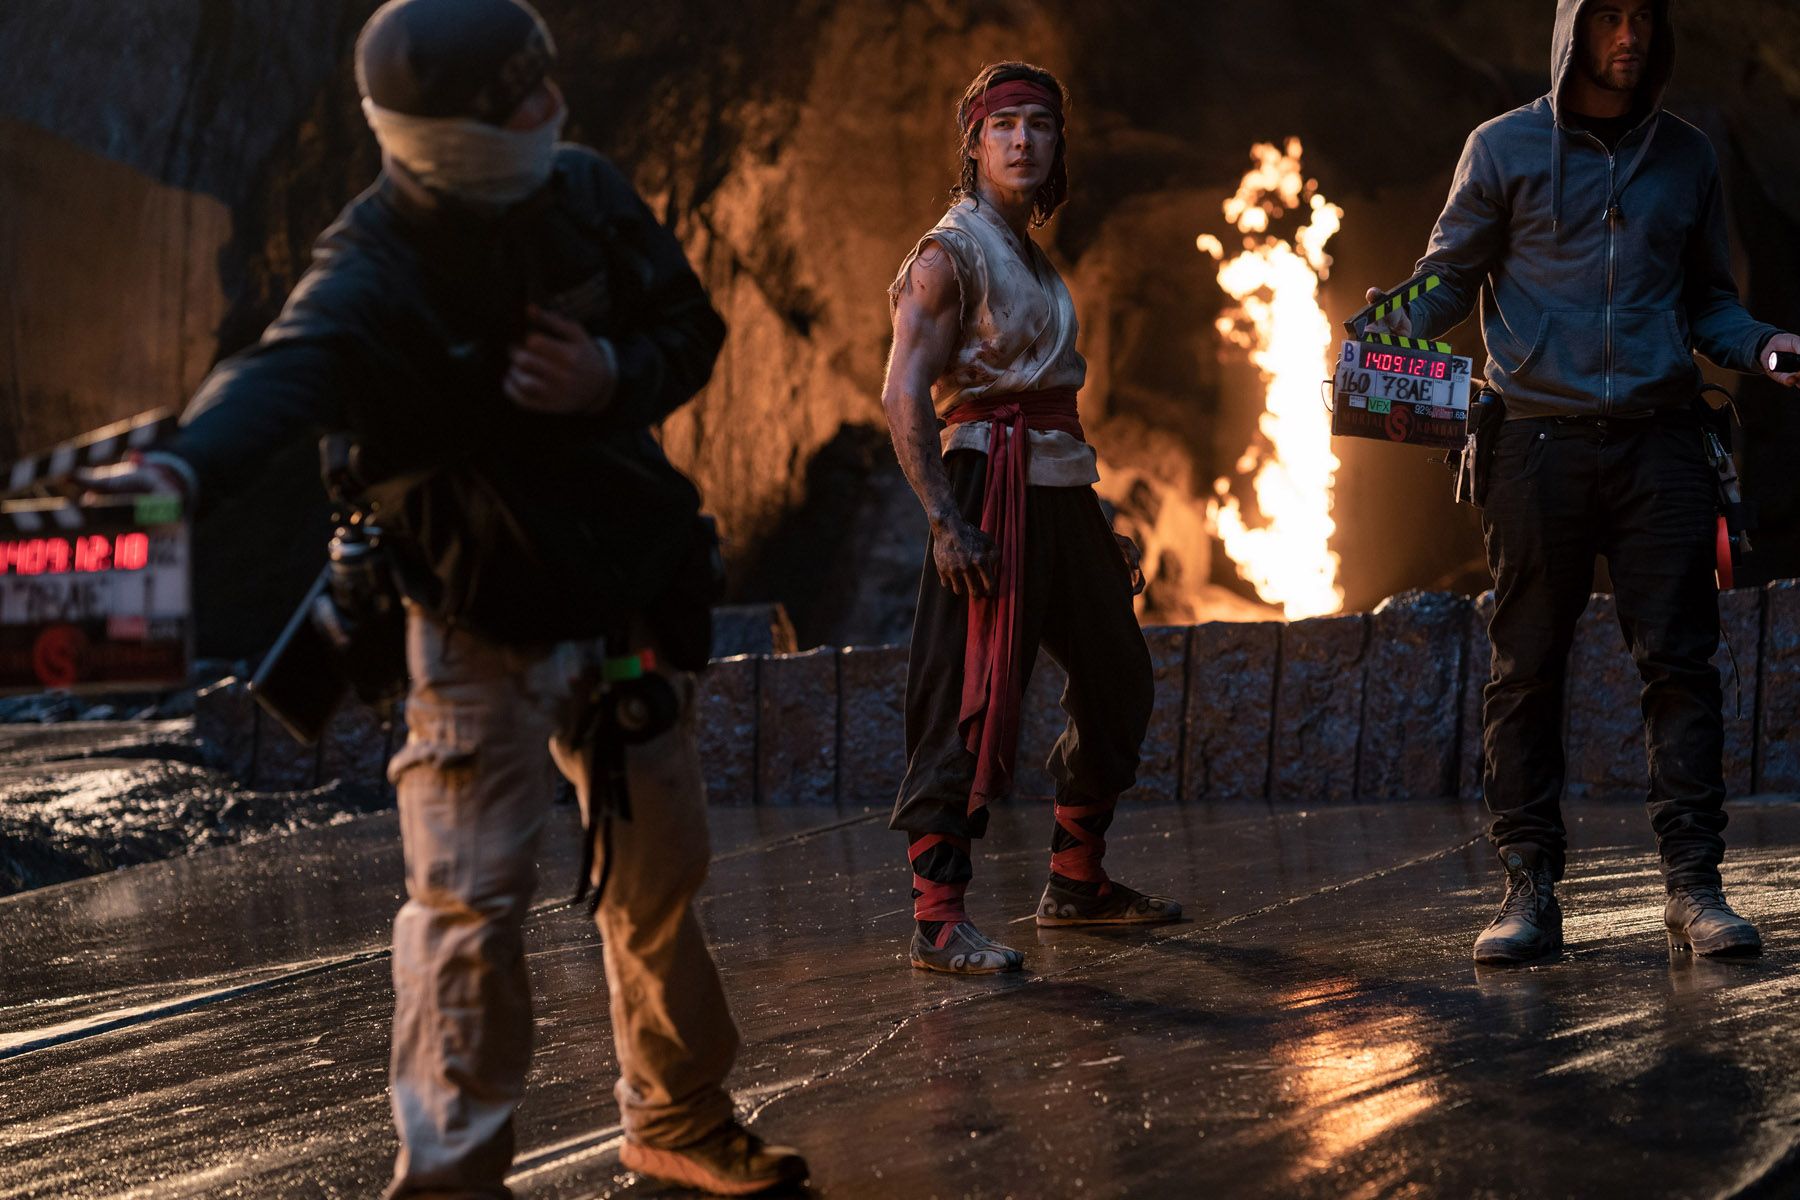 27 Things We Learned About Mortal Kombat From Our Set Visit